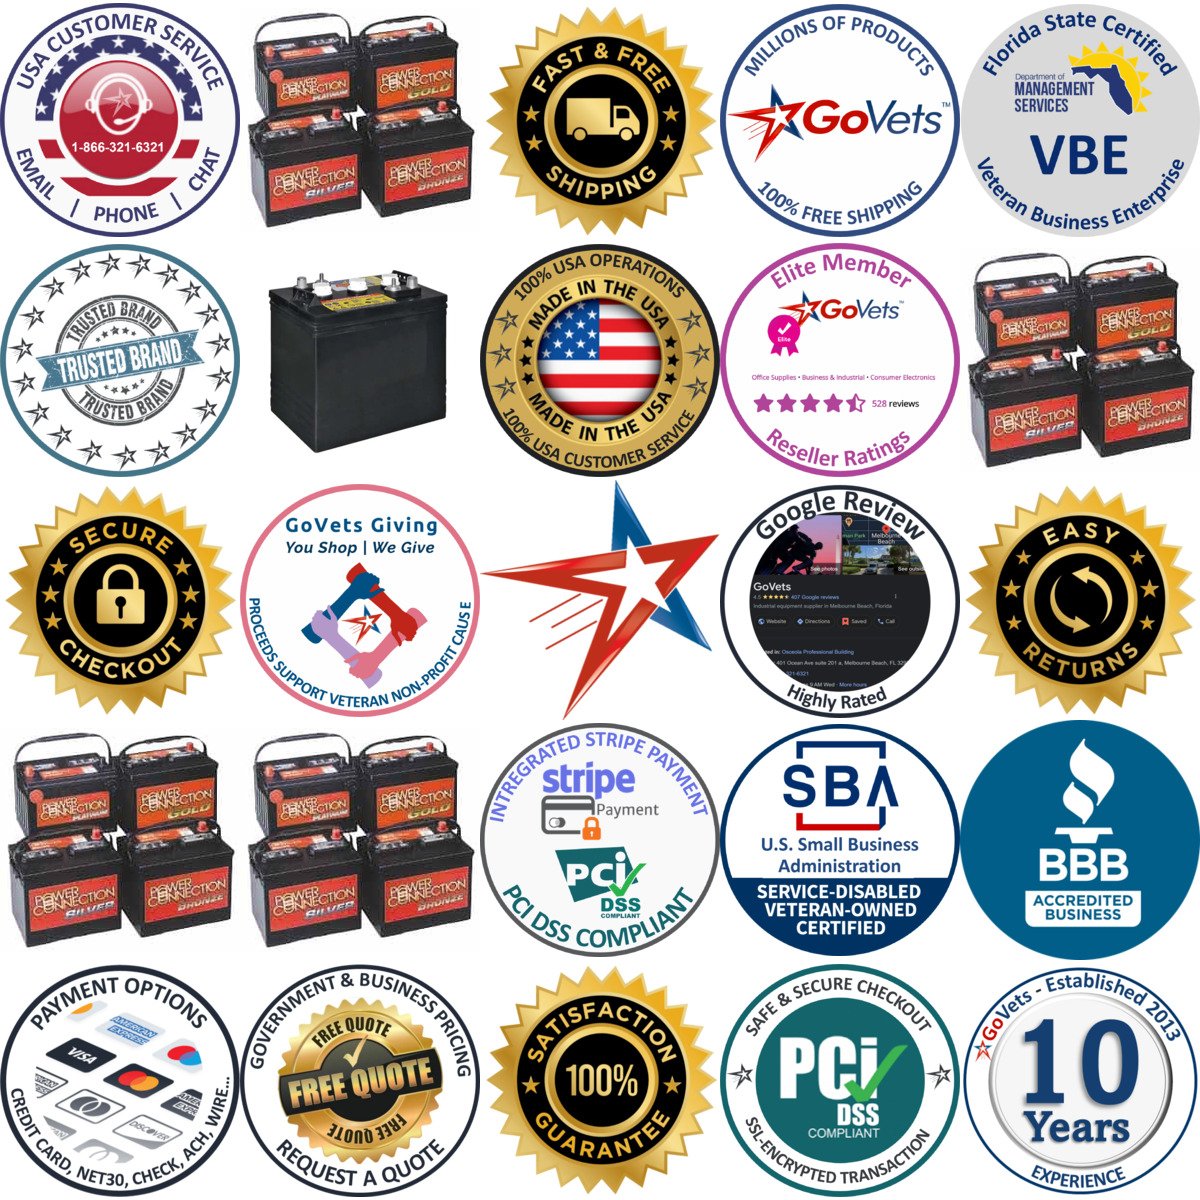 A selection of Automotive Batteries products on GoVets